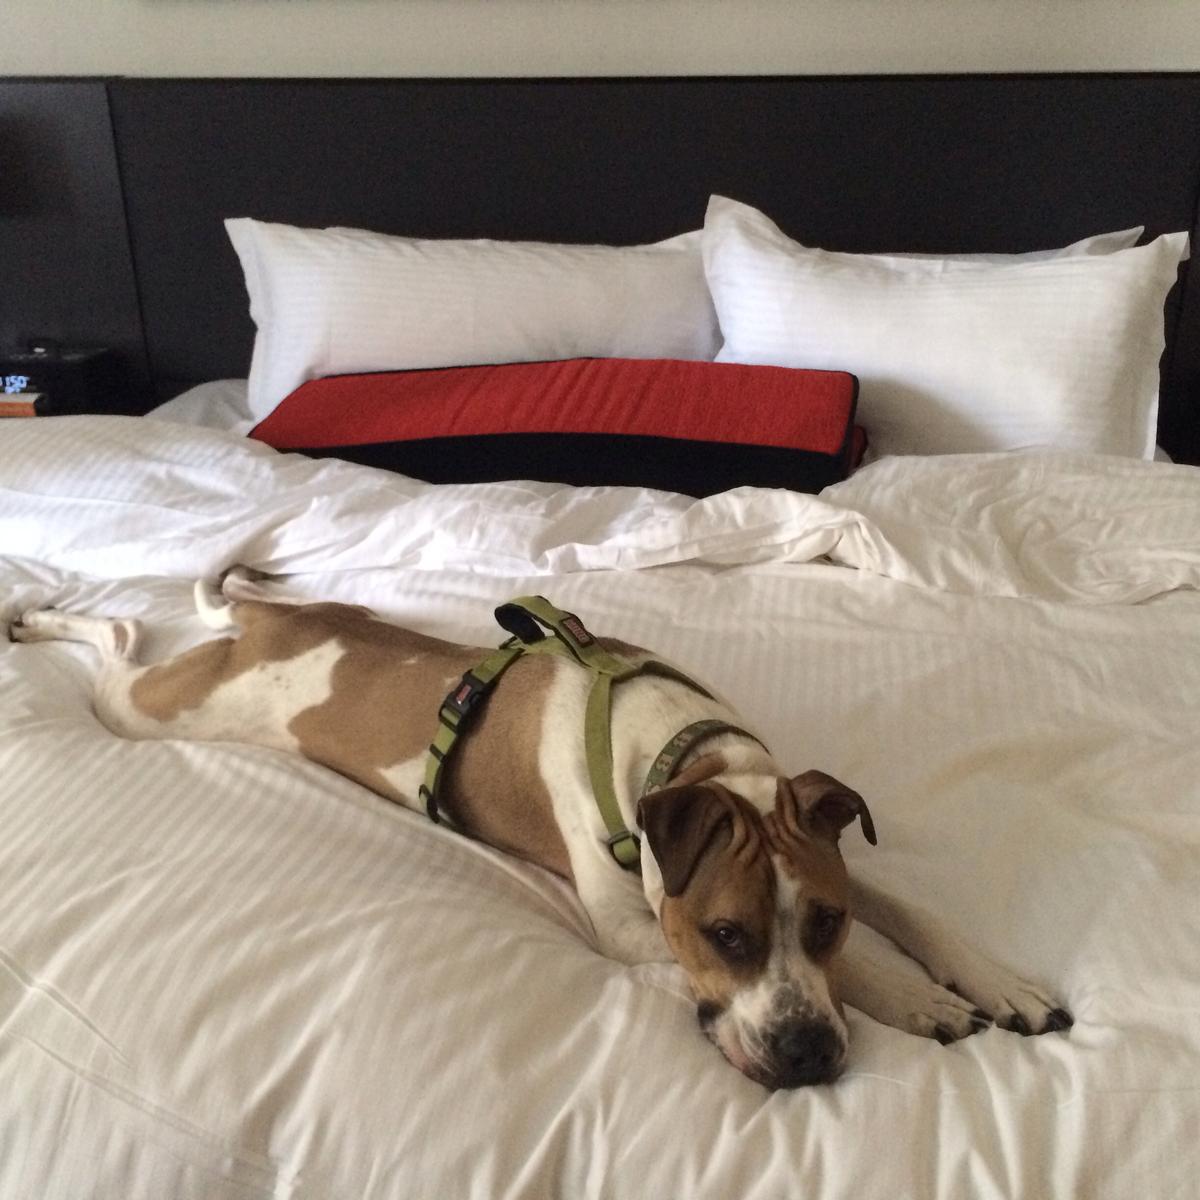 Pet-friendly hotels roll out the red carpet for your favorite traveling  companion